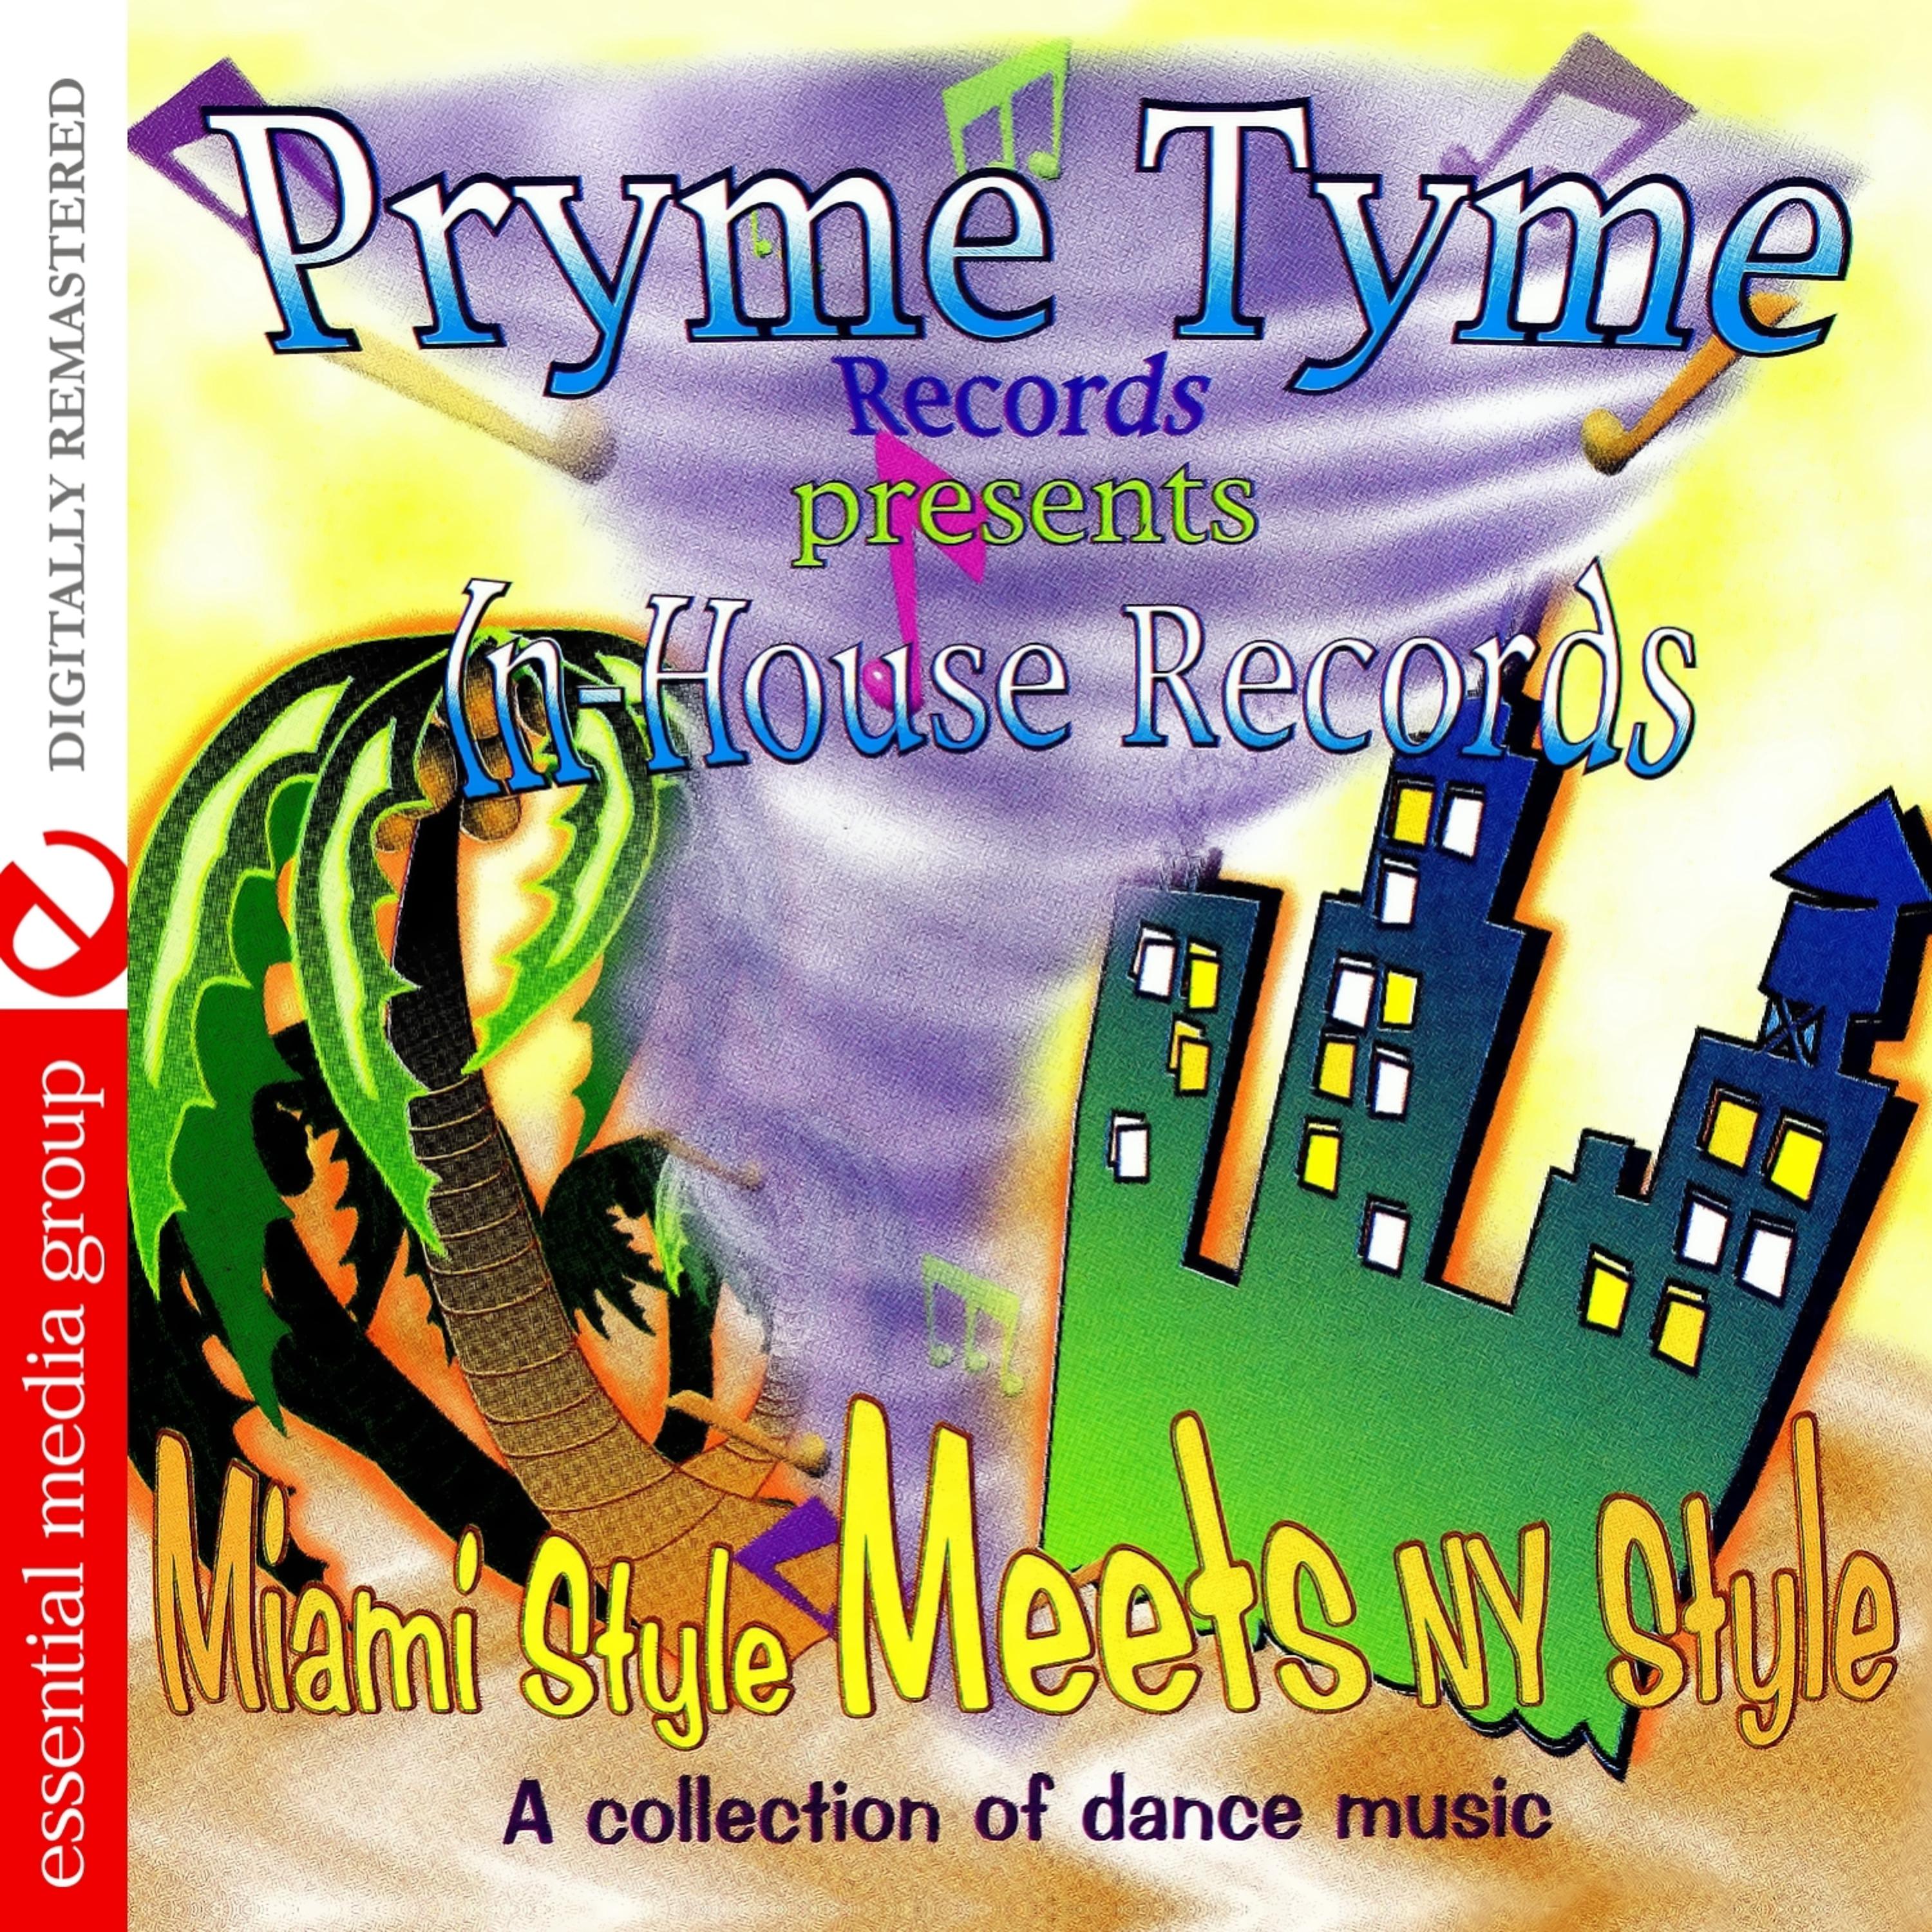 Постер альбома Pryme Tyme Records Presents In-House Records Miami Style Meets NY Style (Digitally Remastered)